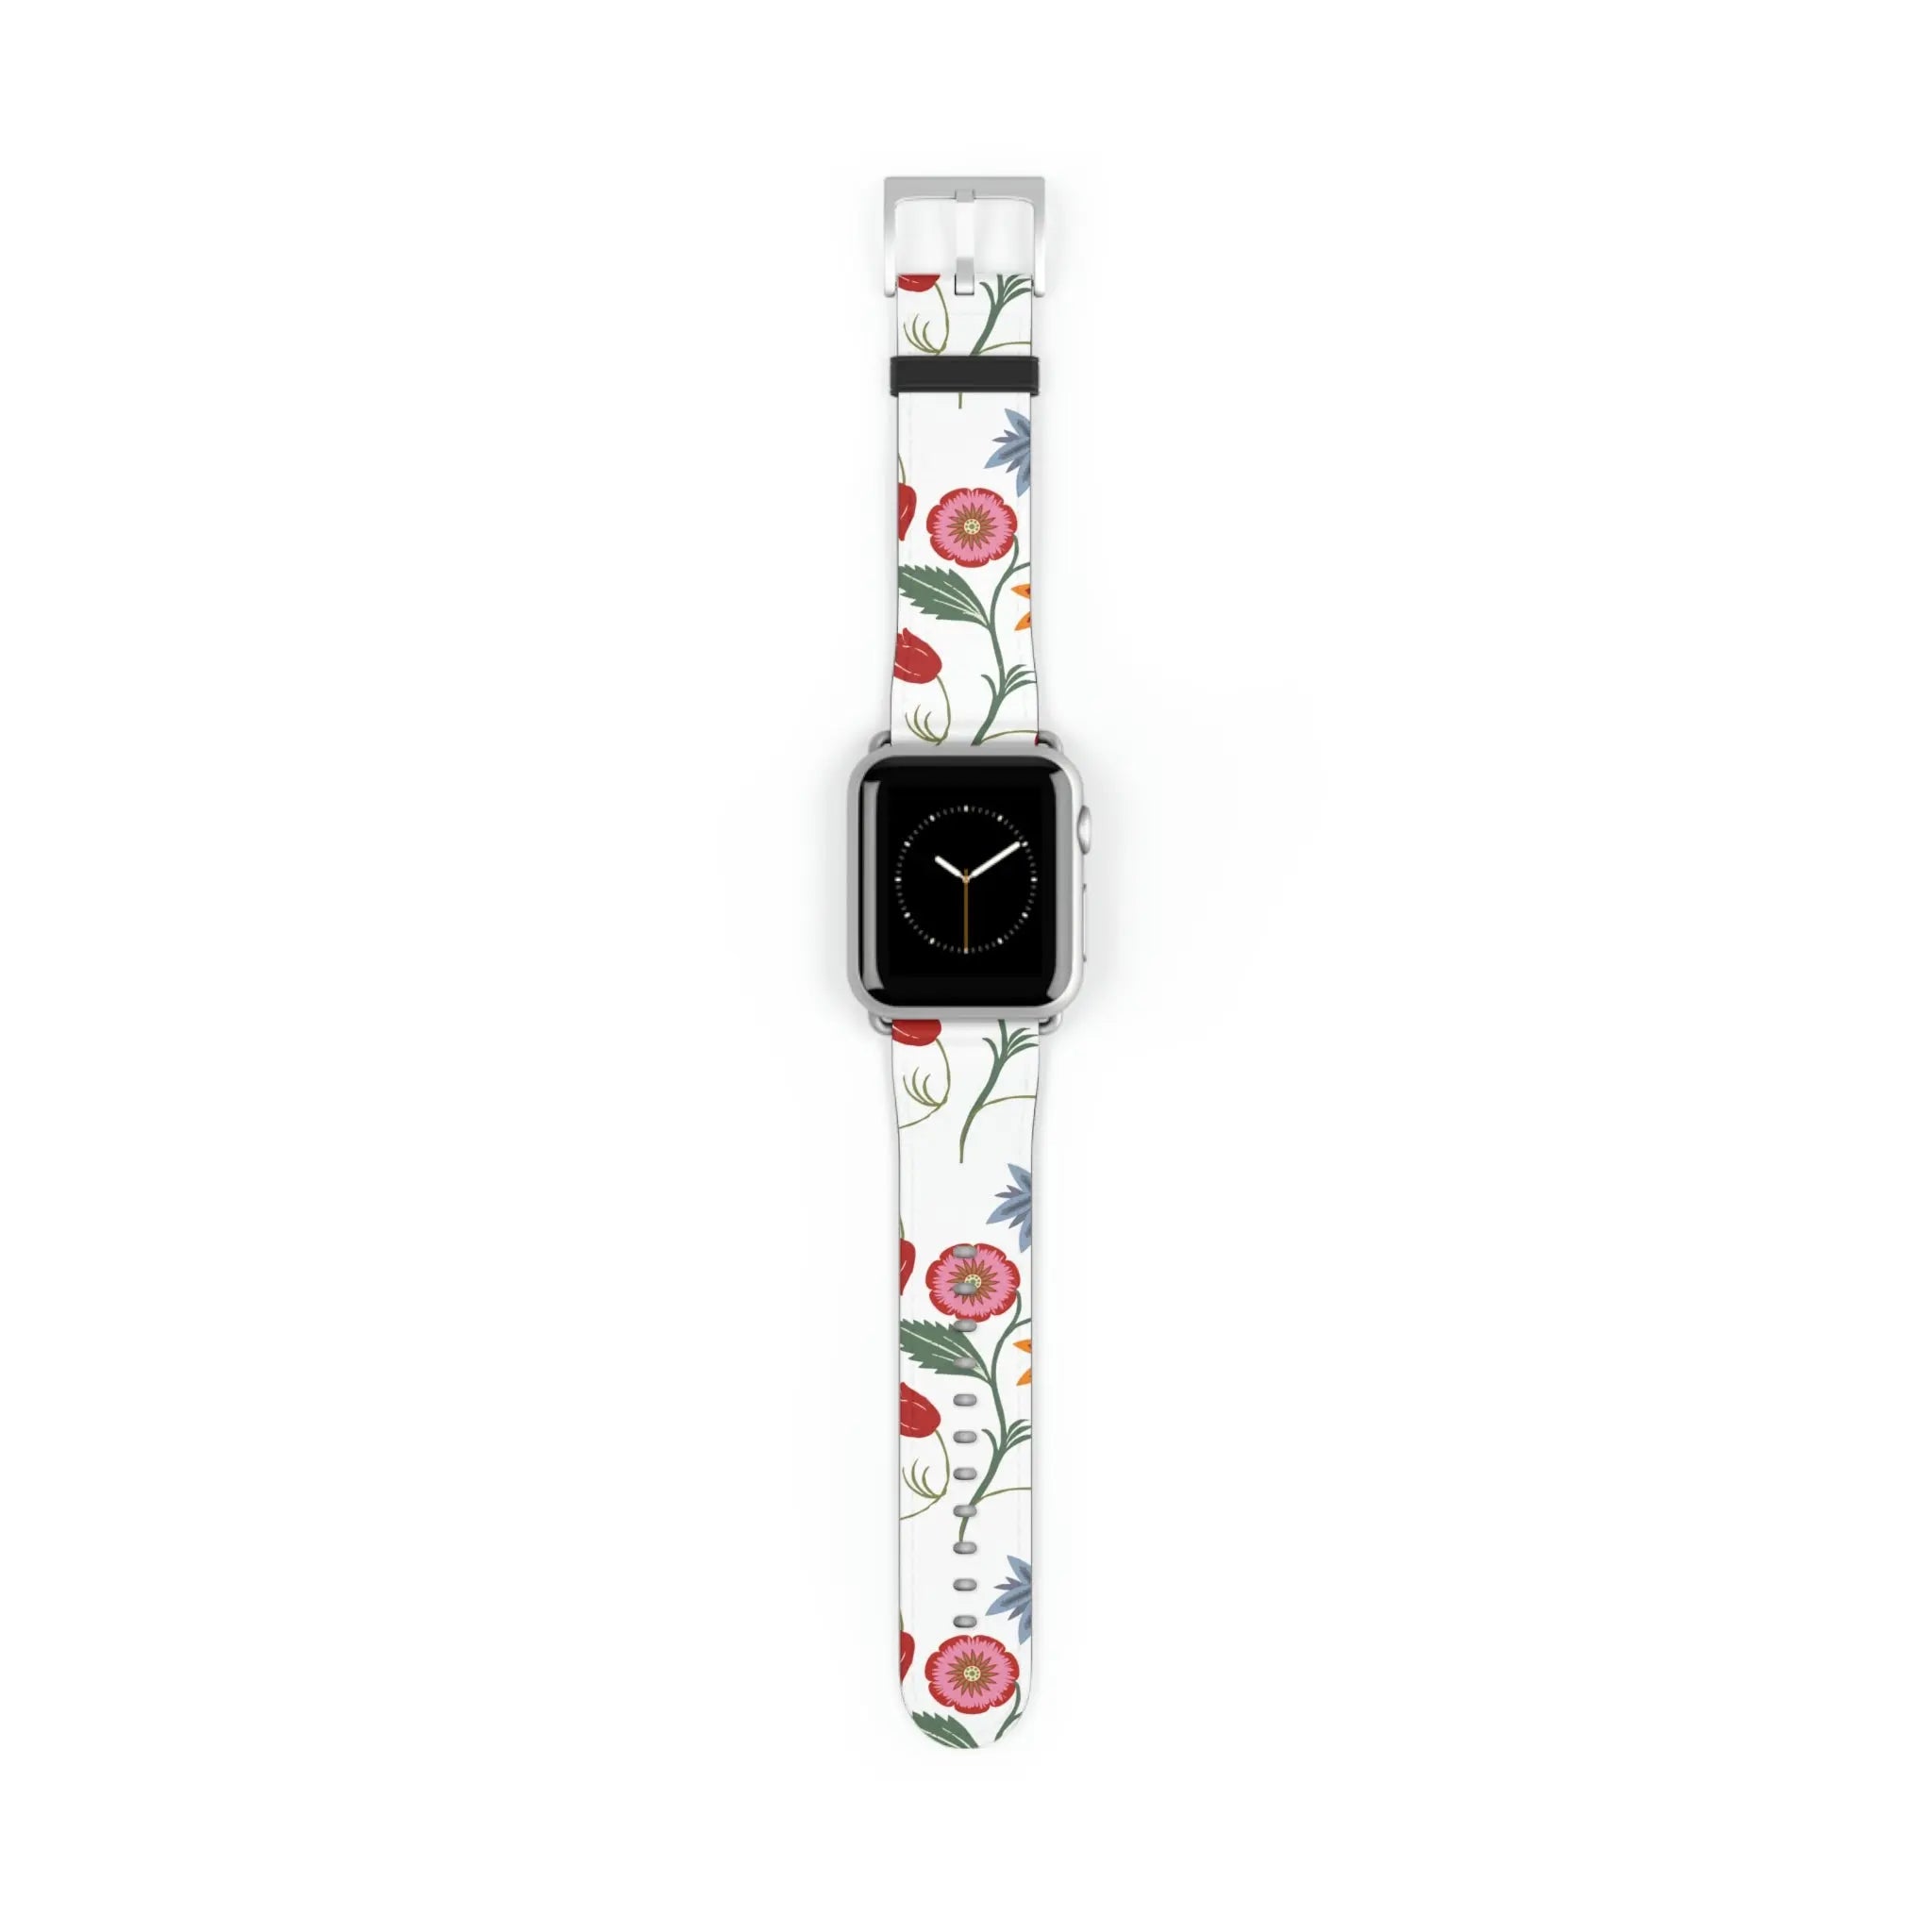  Just Bloom (Wild Flowers) Watch Band for Apple Watch Watch Bands38-41mmSilverMatte